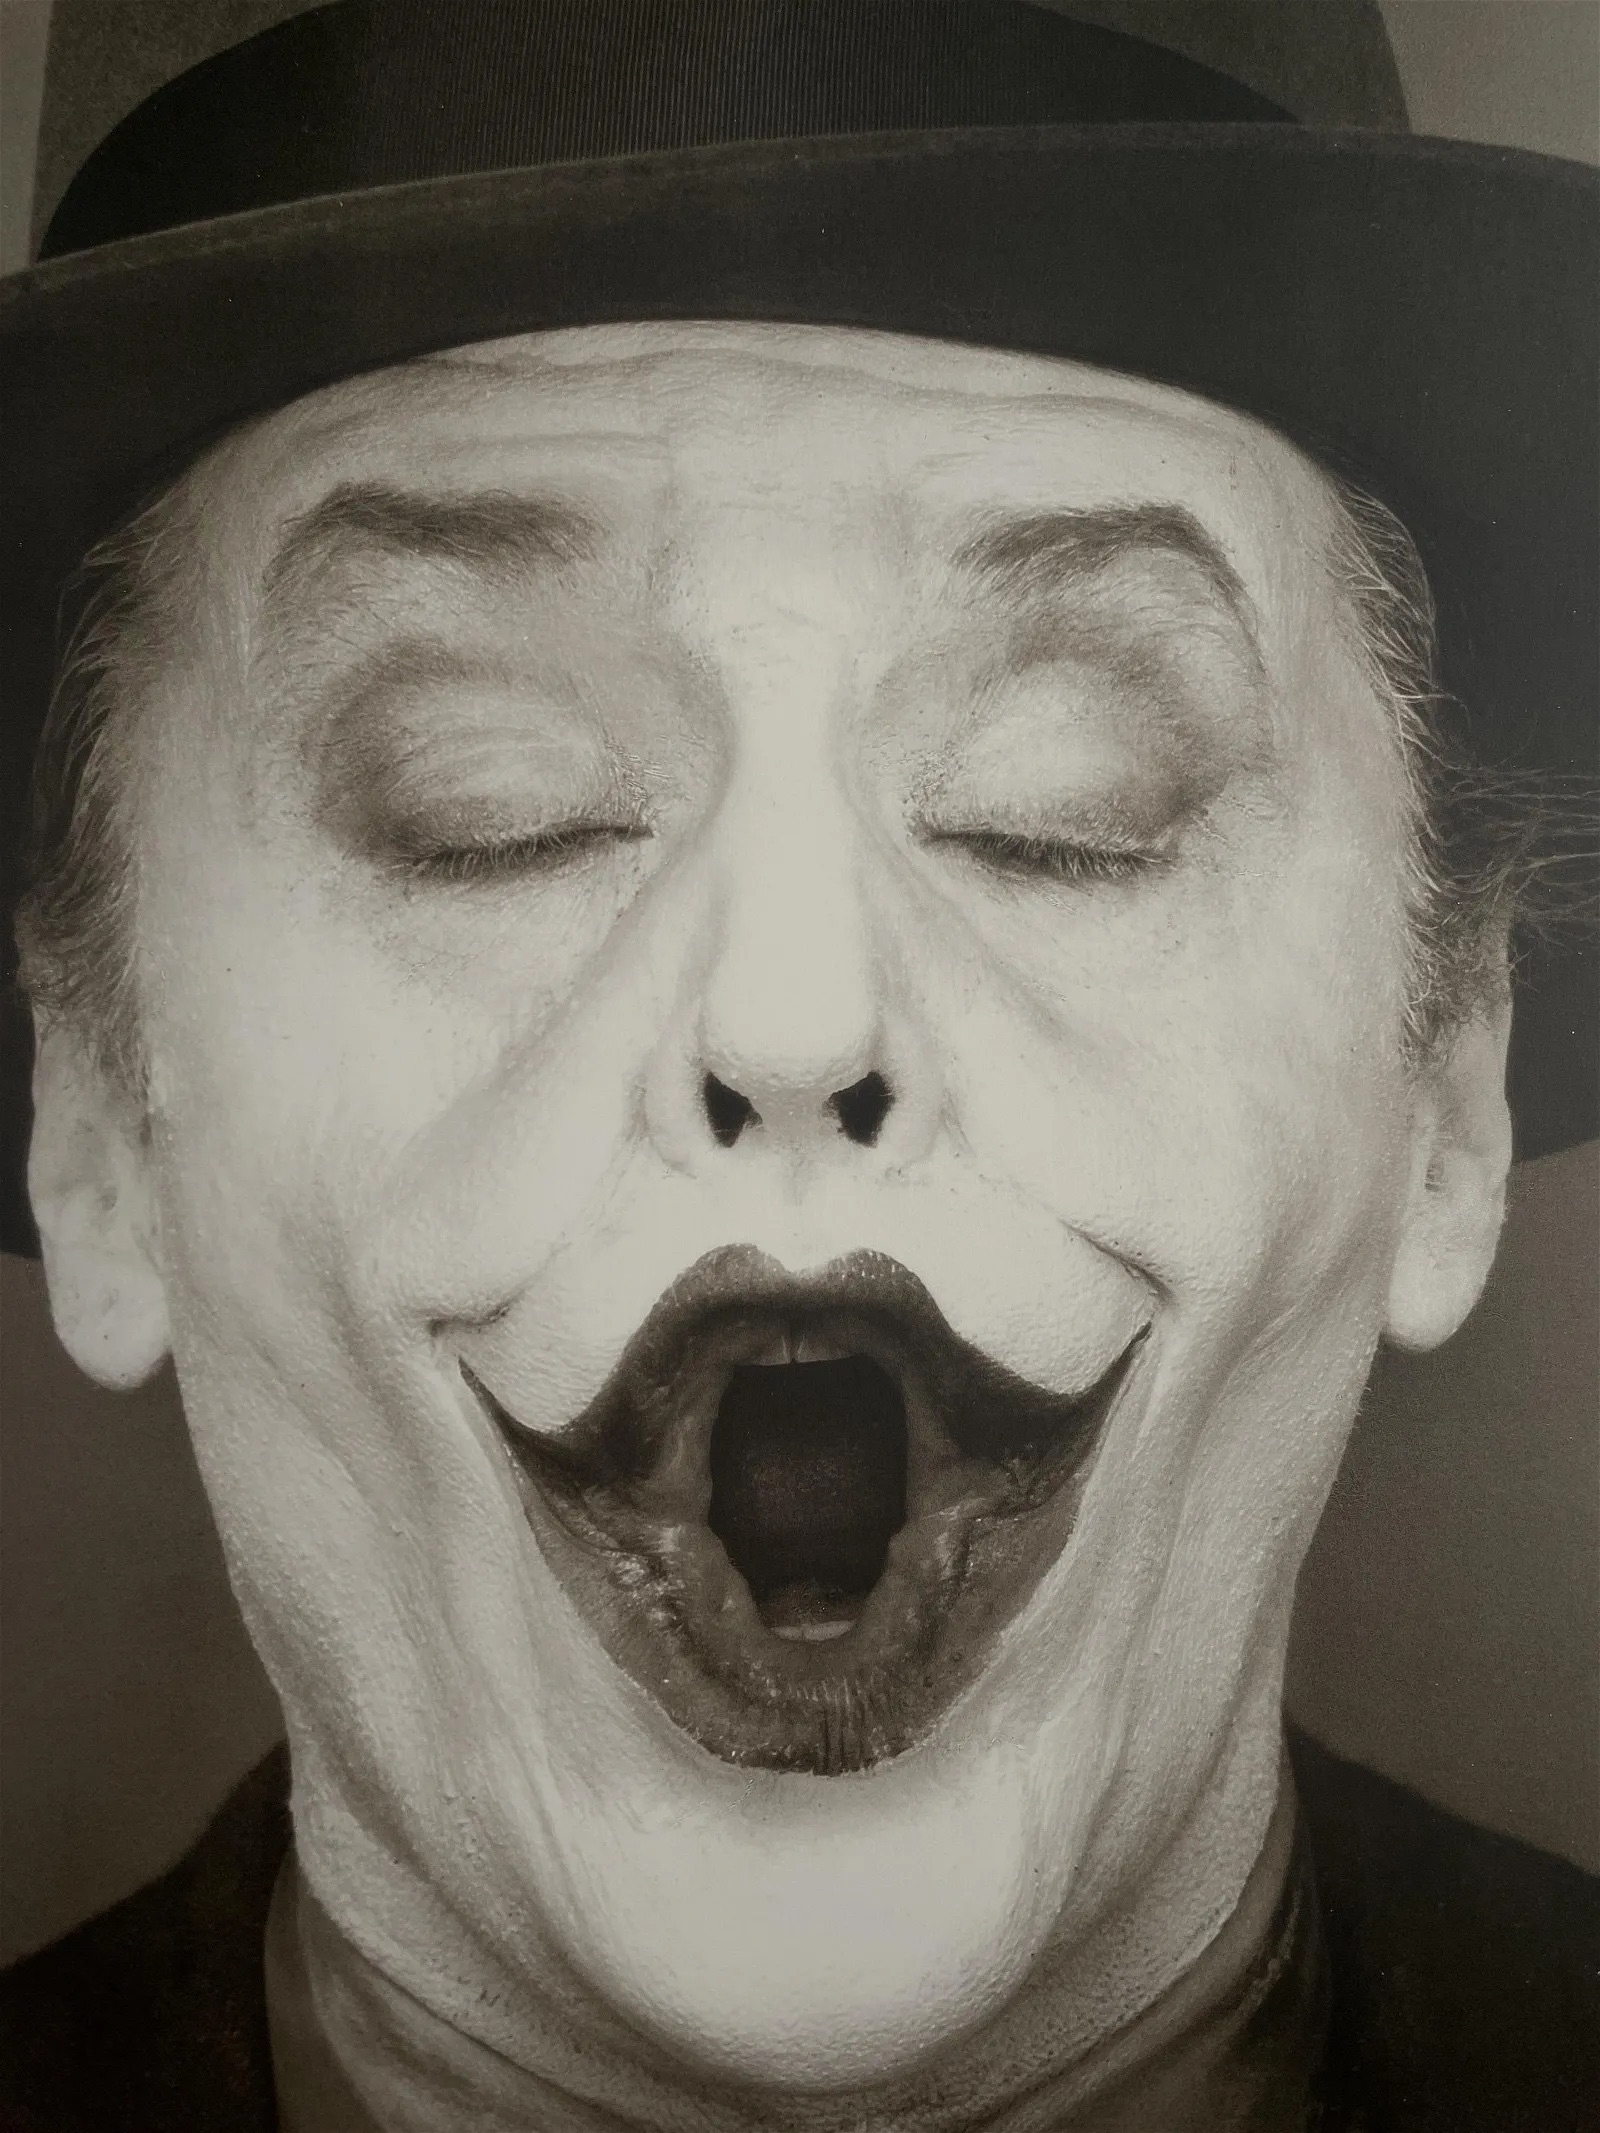 Lot of Four Herb Ritts "Jack Nicholson, London, 1988" Prints - Image 2 of 4